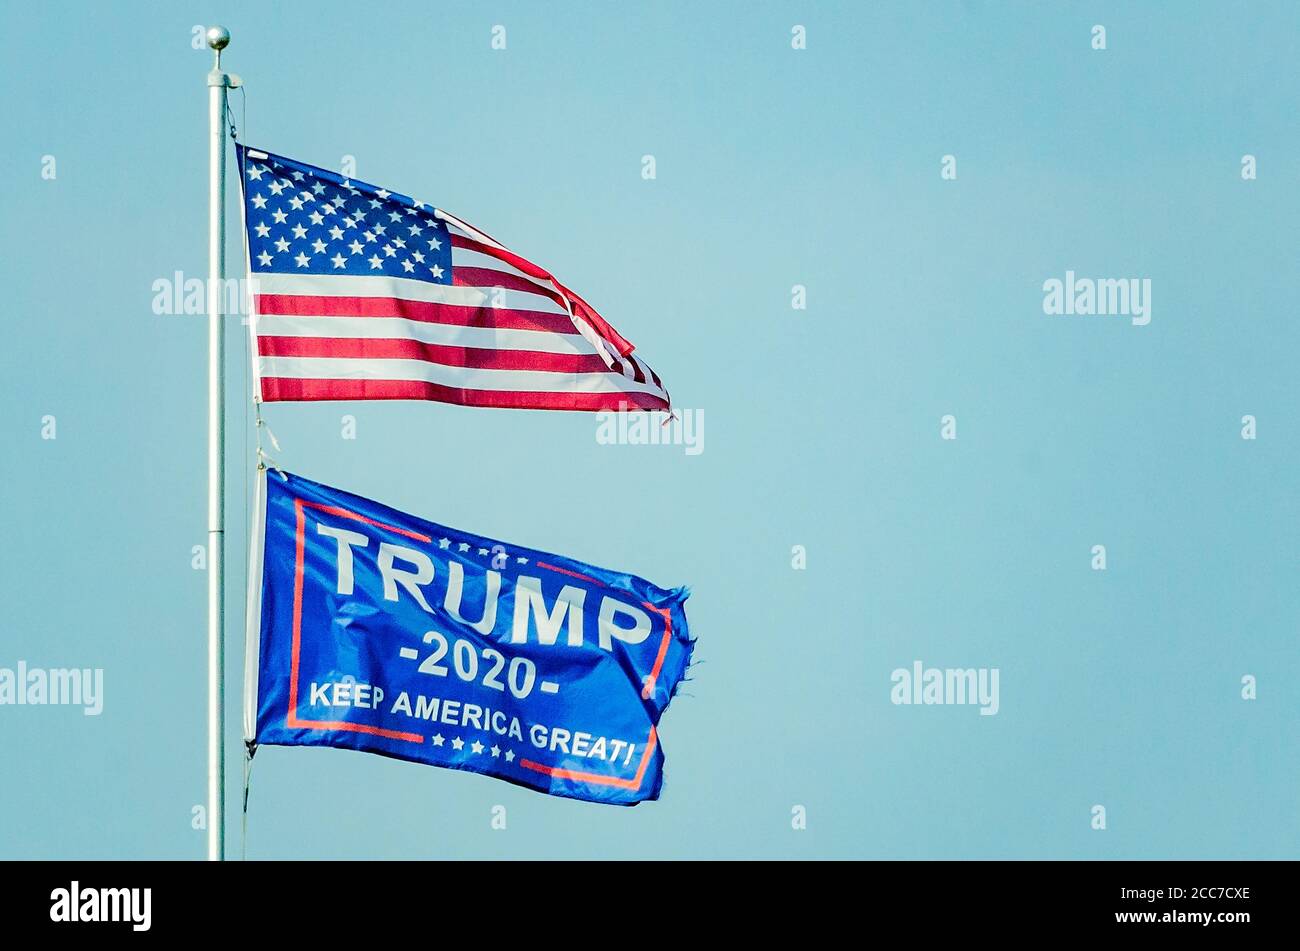 An American flag and a Trump 2020 flag fly on a pole, Aug. 17, 2020, in Coden, Alabama. The flag indicates support for American President Donald Trump. Stock Photo